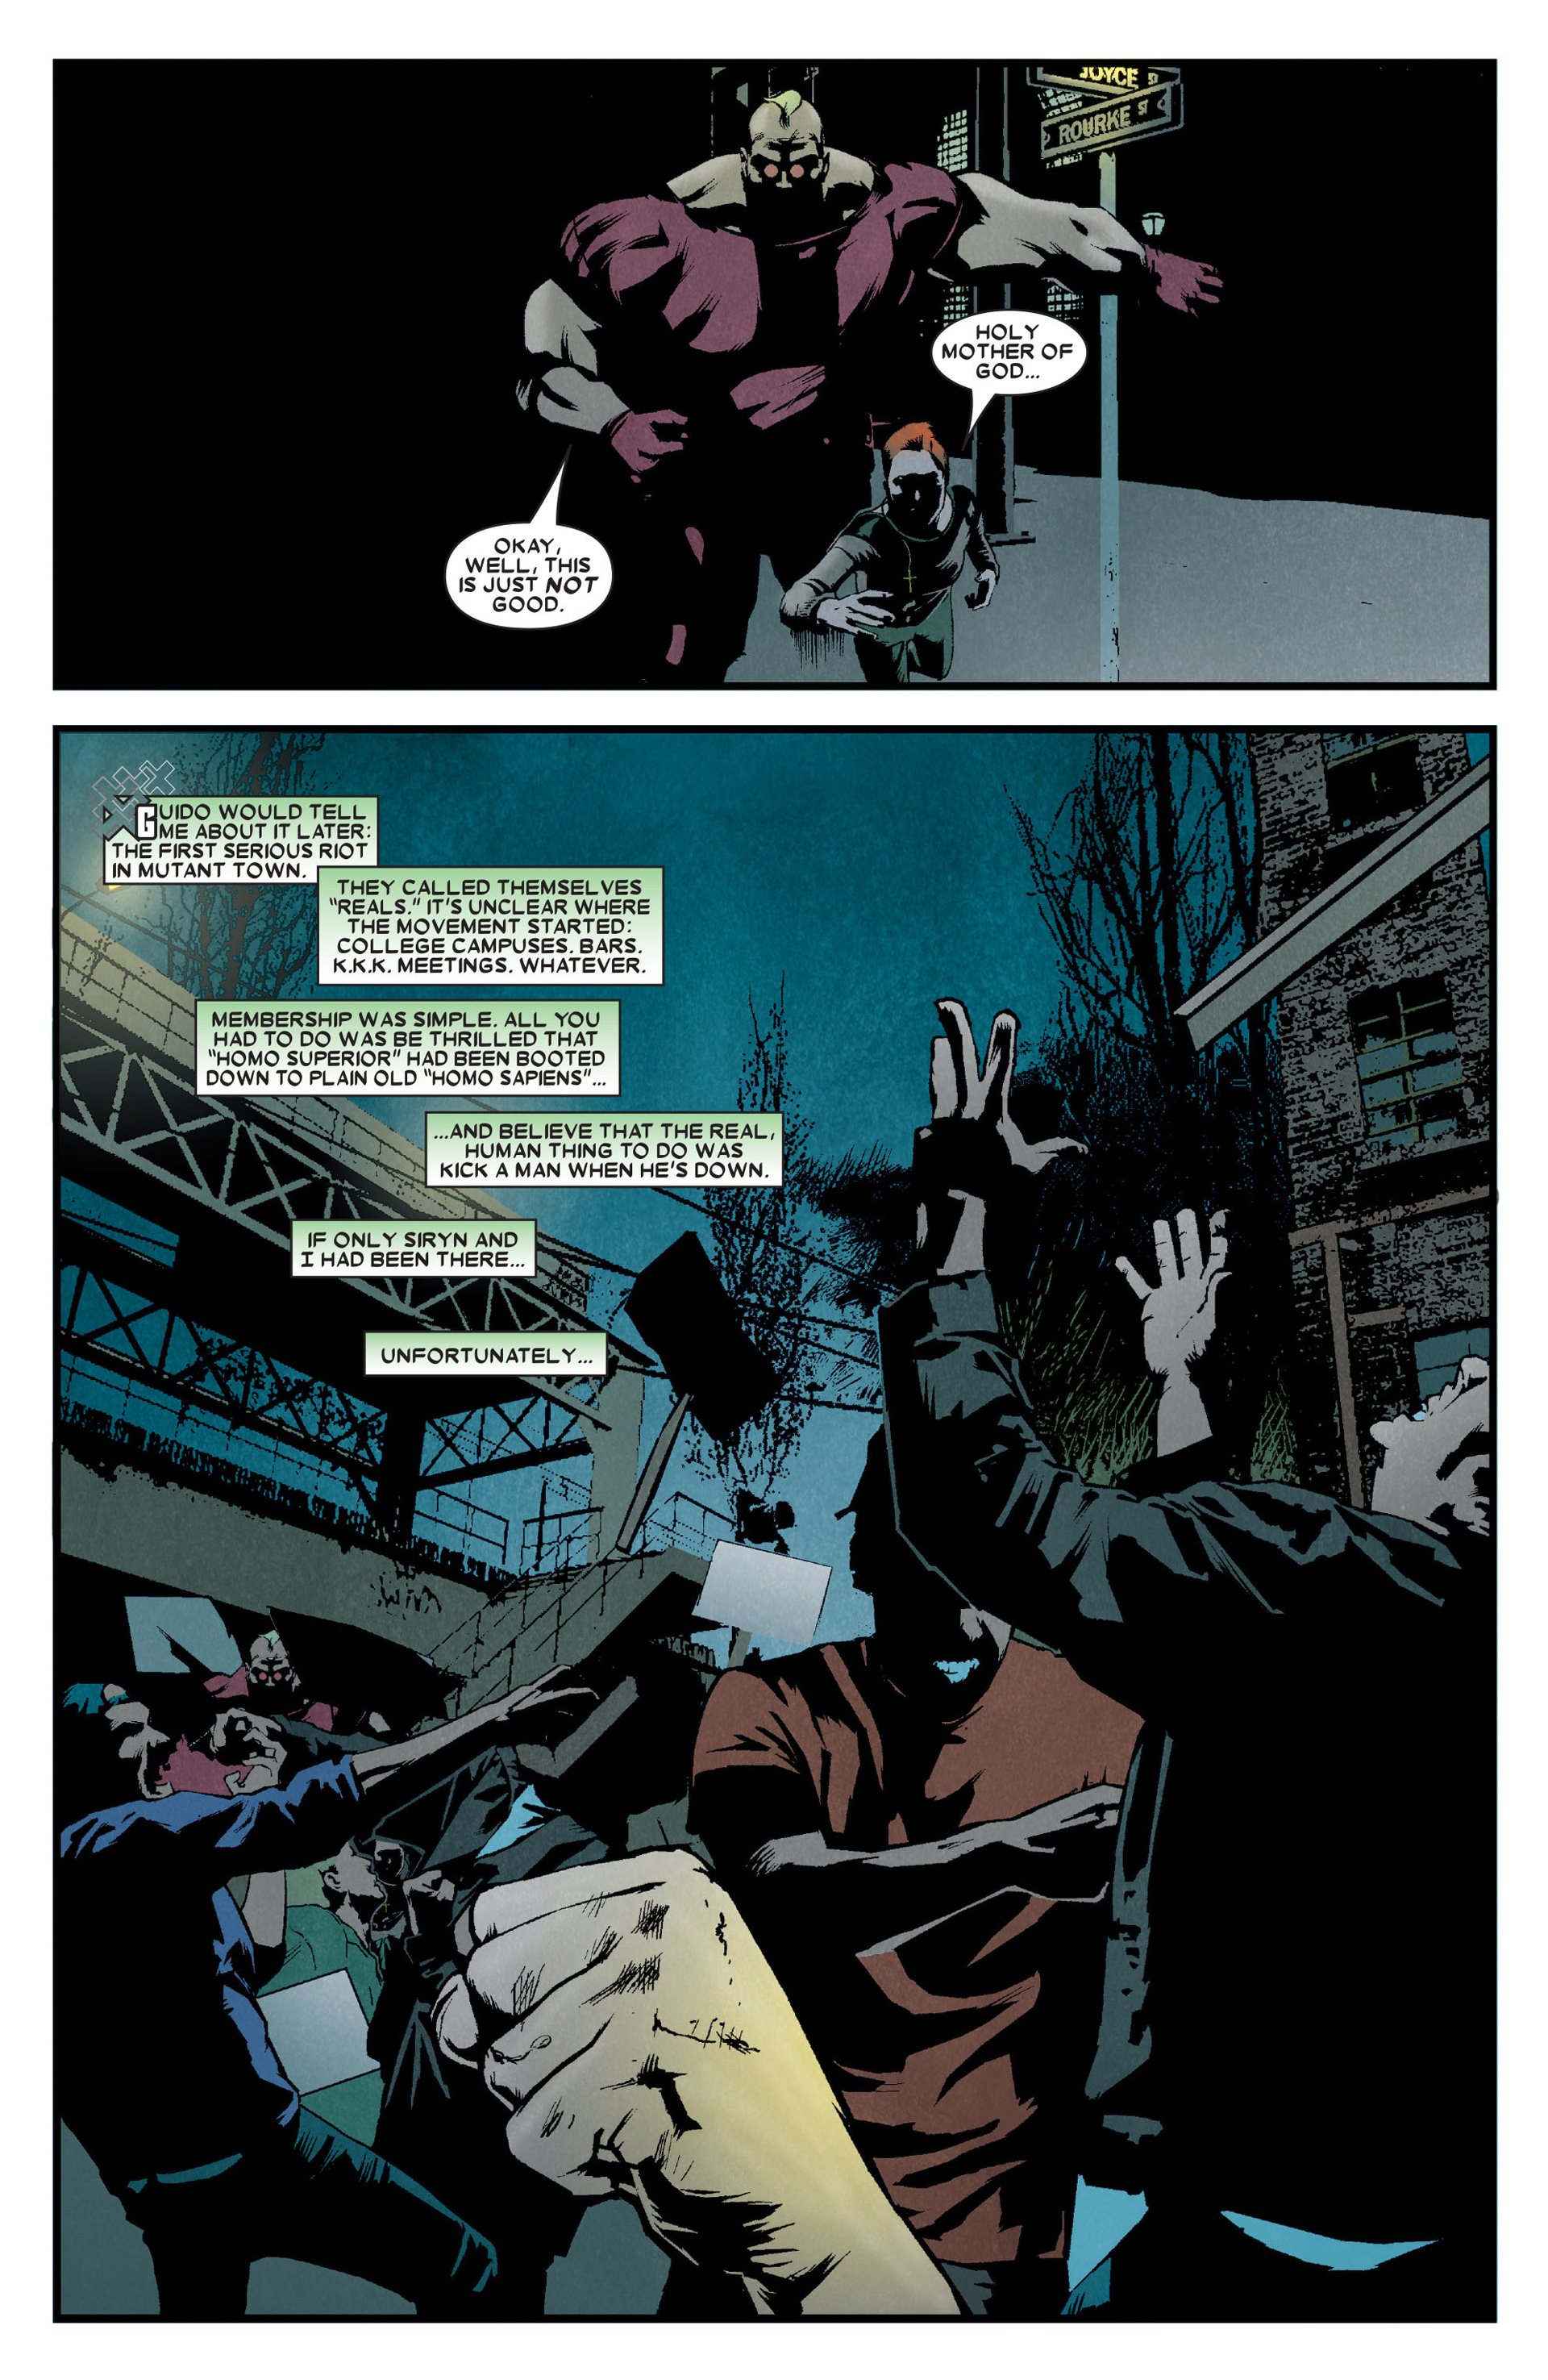 X-Factor (2006) 3 Page 13